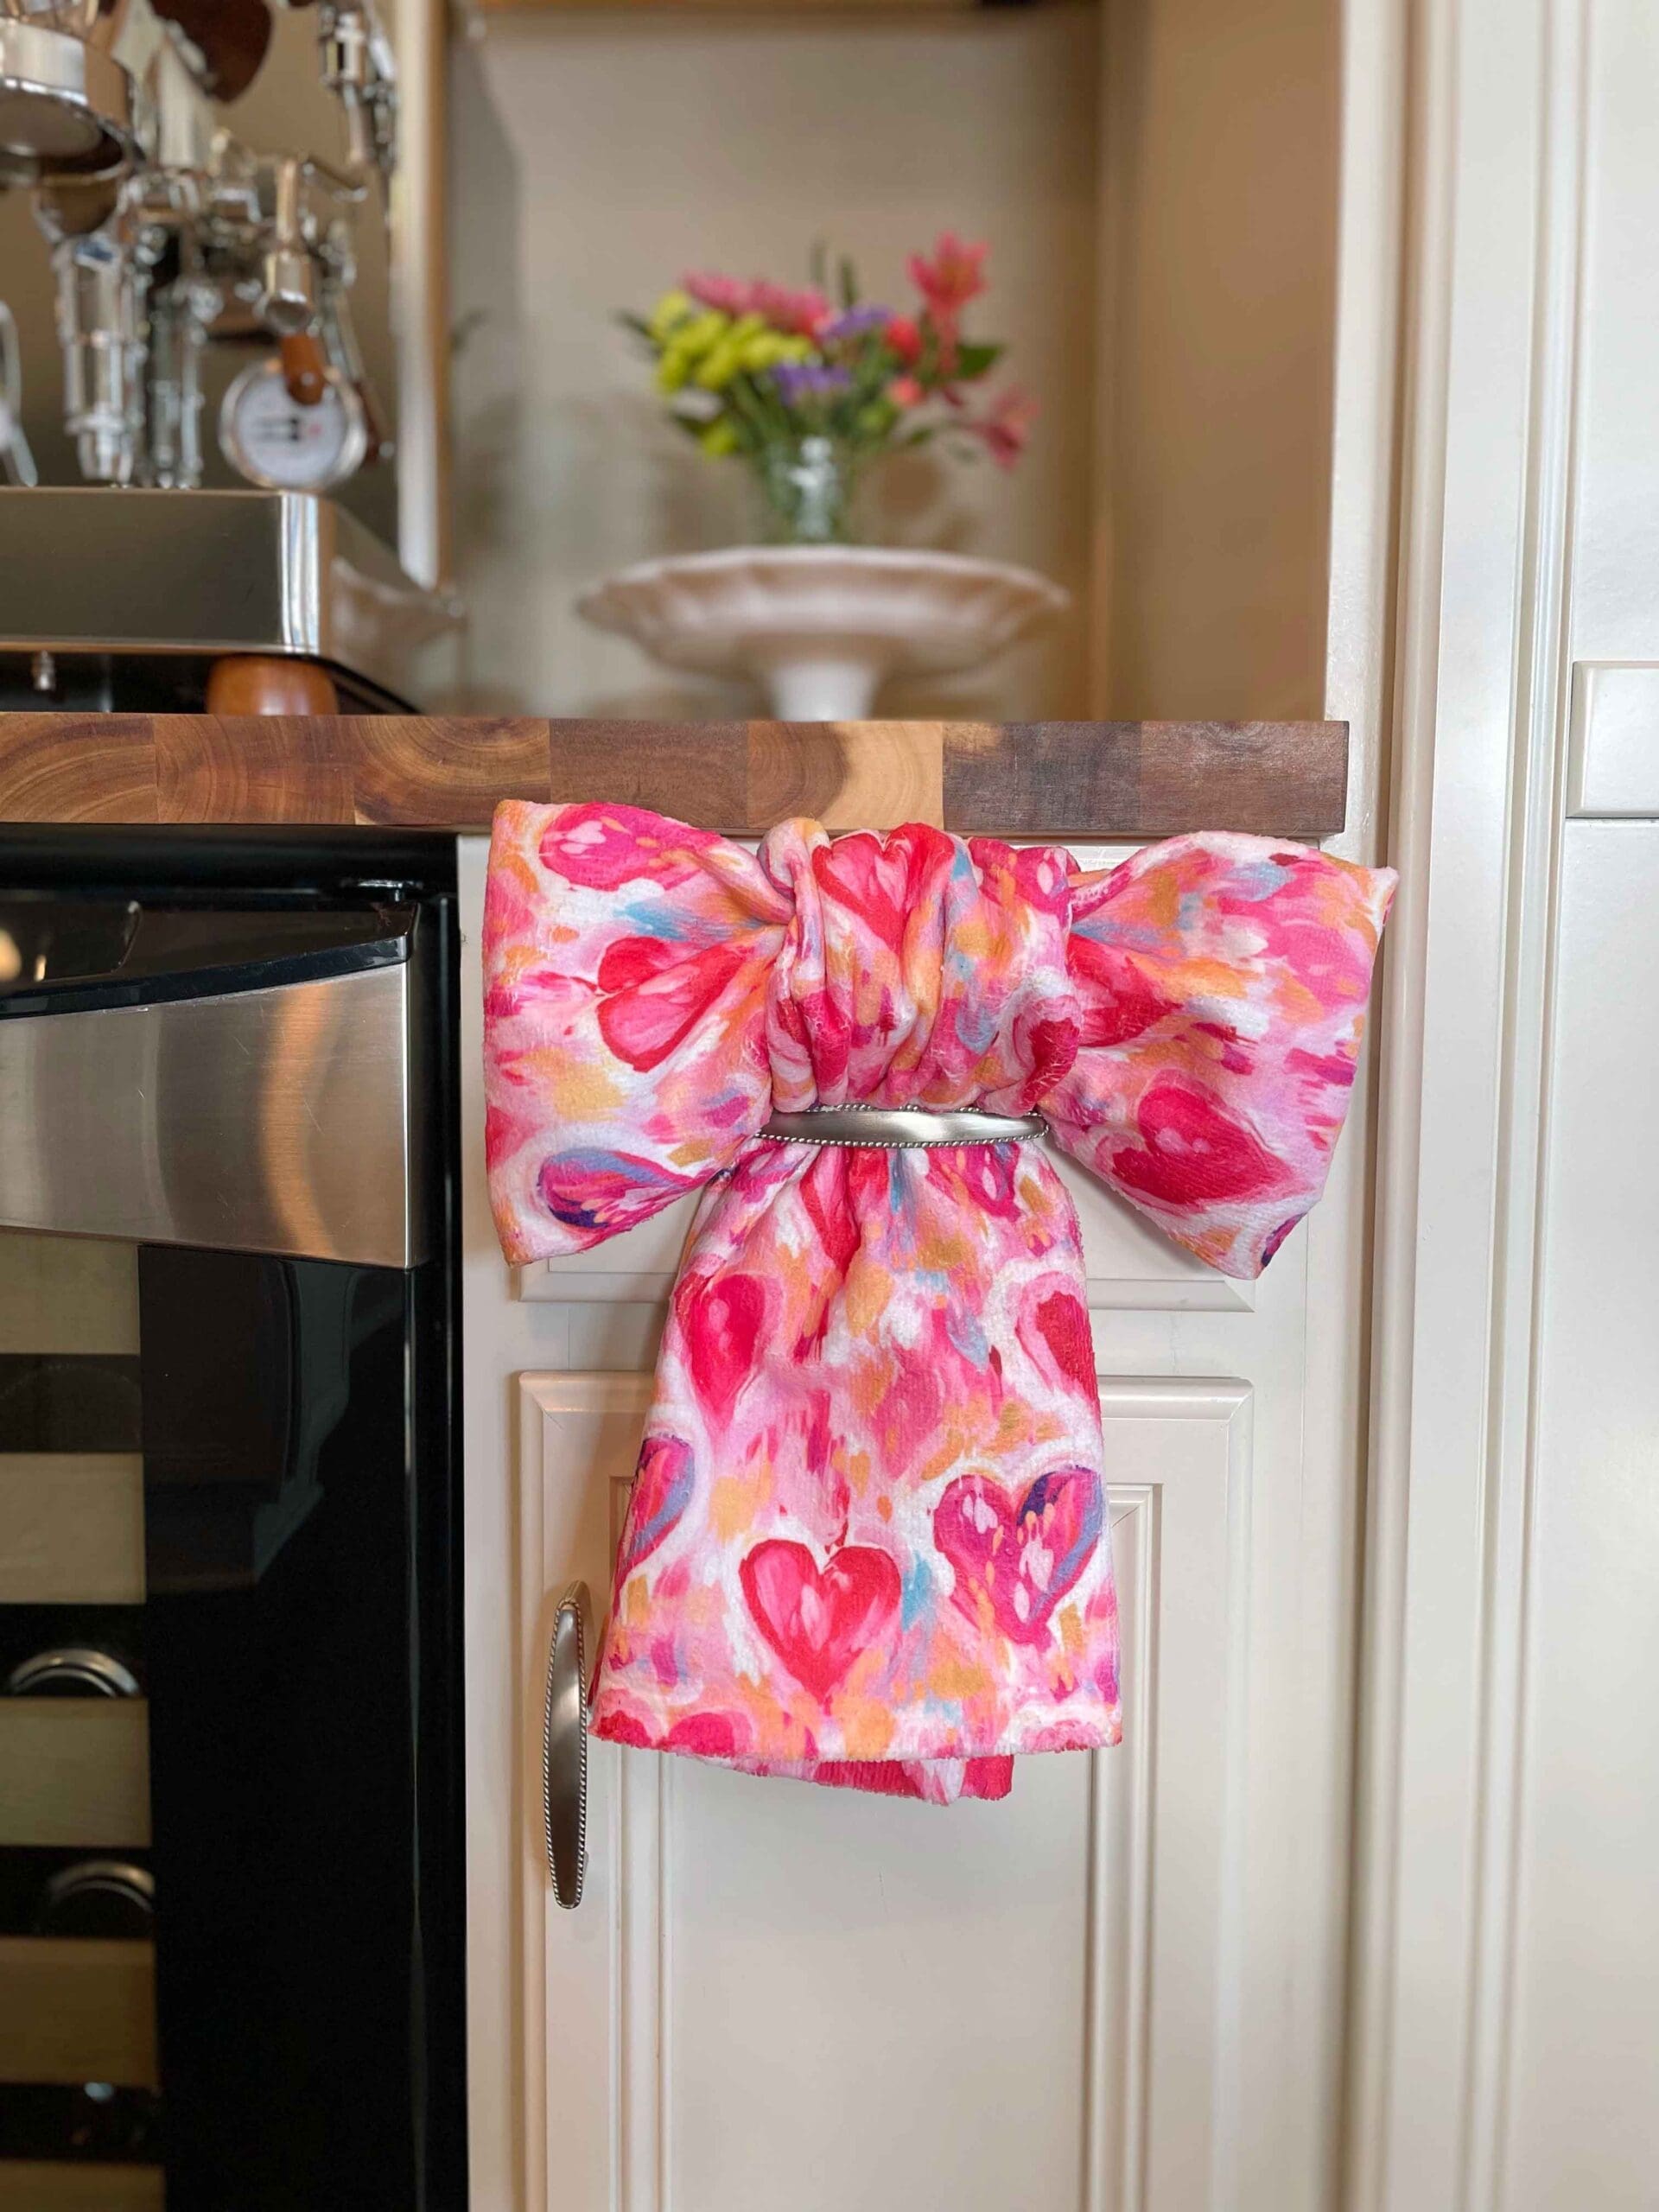 How to Recreate the Viral Dish Towel Bow